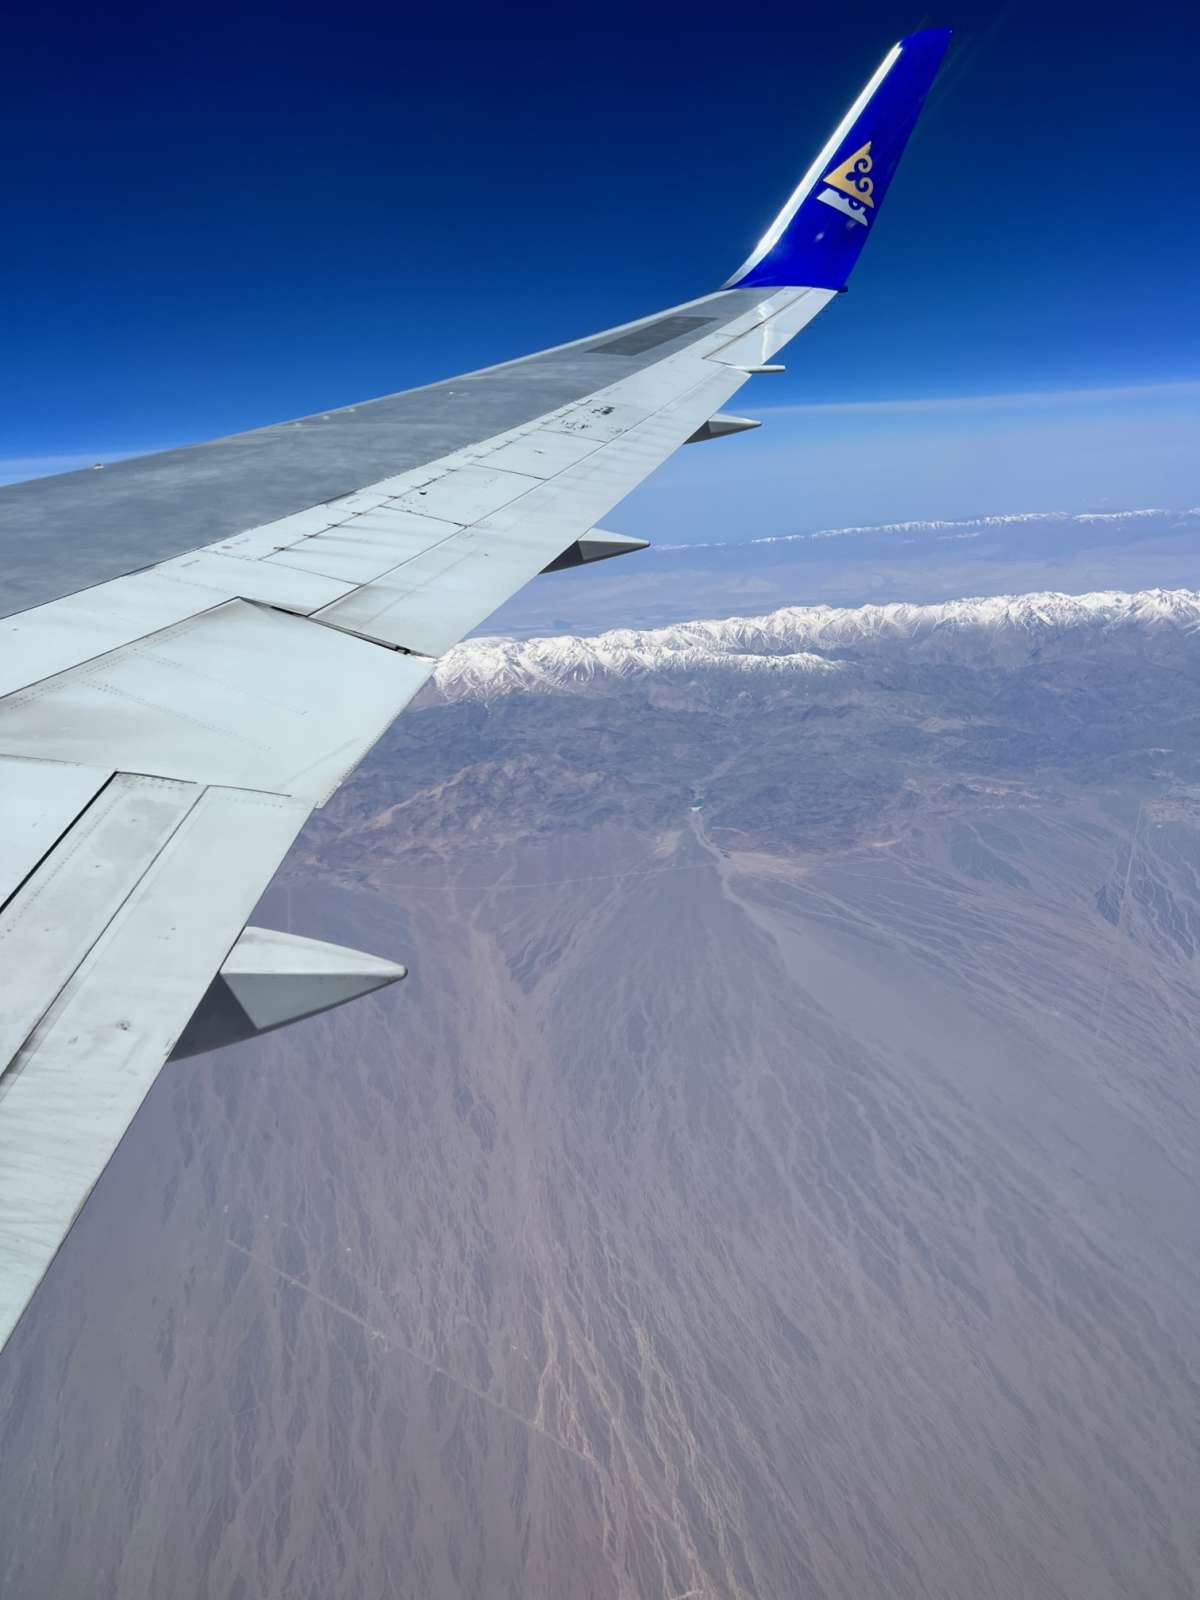 View from an Air Astana airplane's wing as it flies over the rugged, snowy peaks near Almaty, Kazakhstan, showcasing the vast and varied terrain.